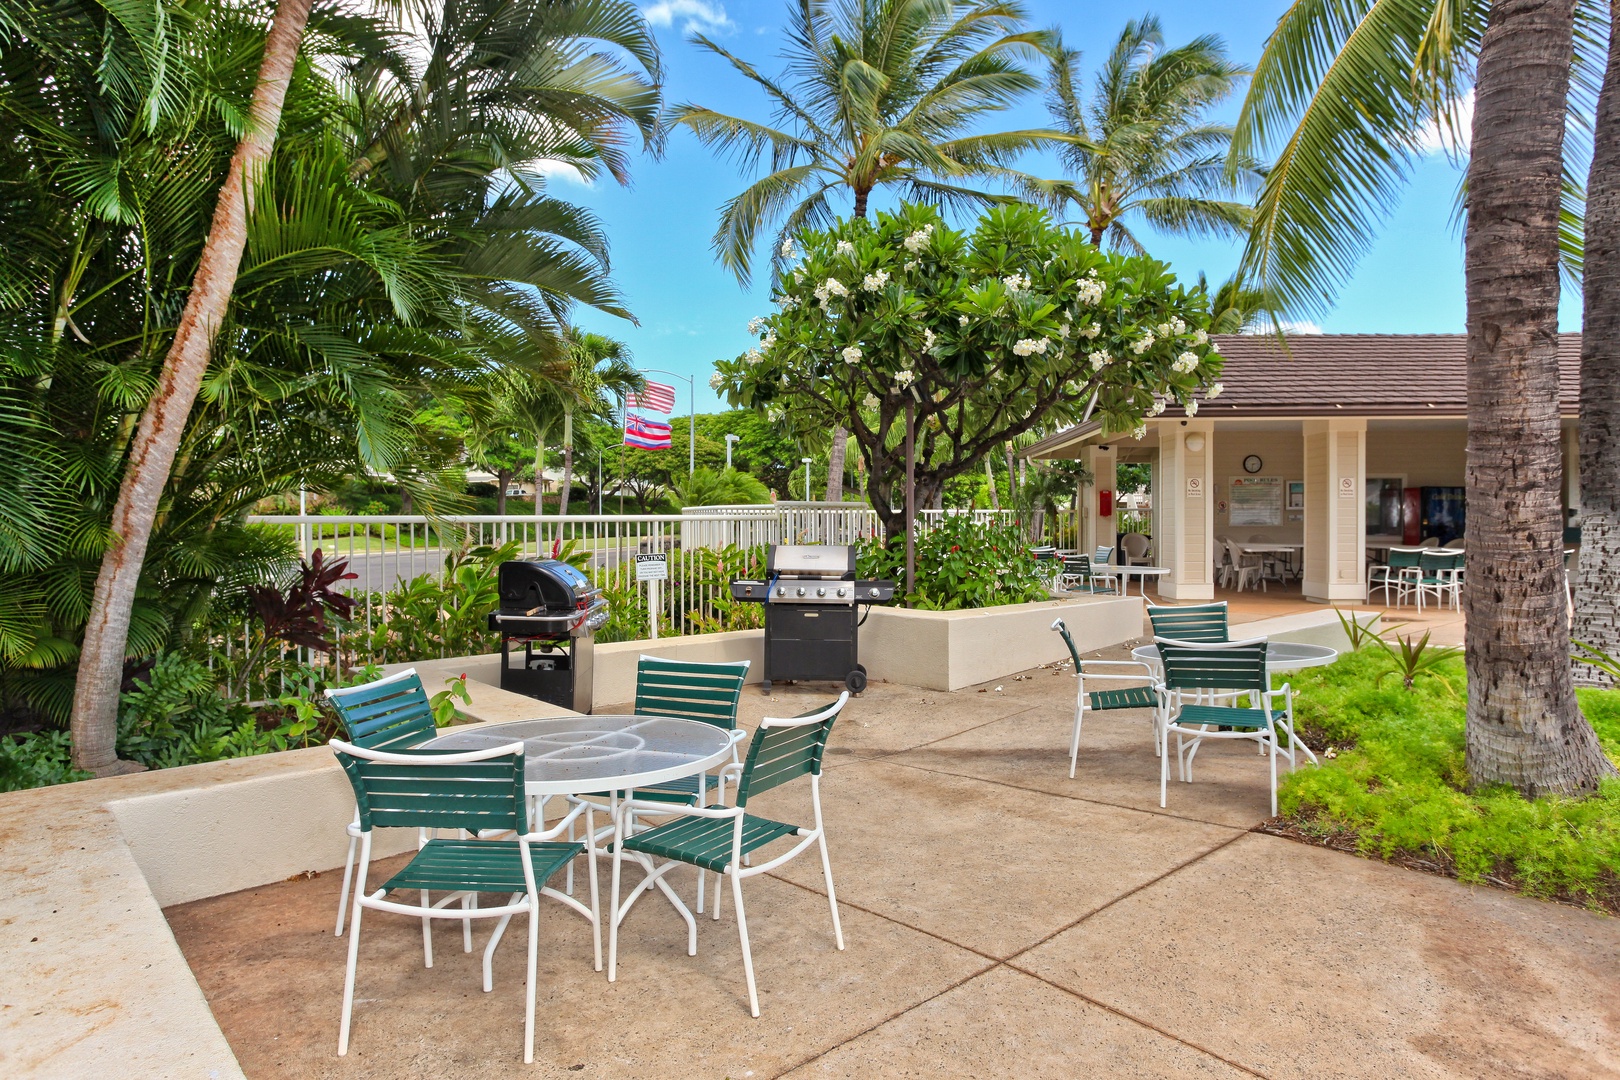 Kapolei Vacation Rentals, Fairways at Ko Olina 8G - The BBQ and picnic area by the community pool.